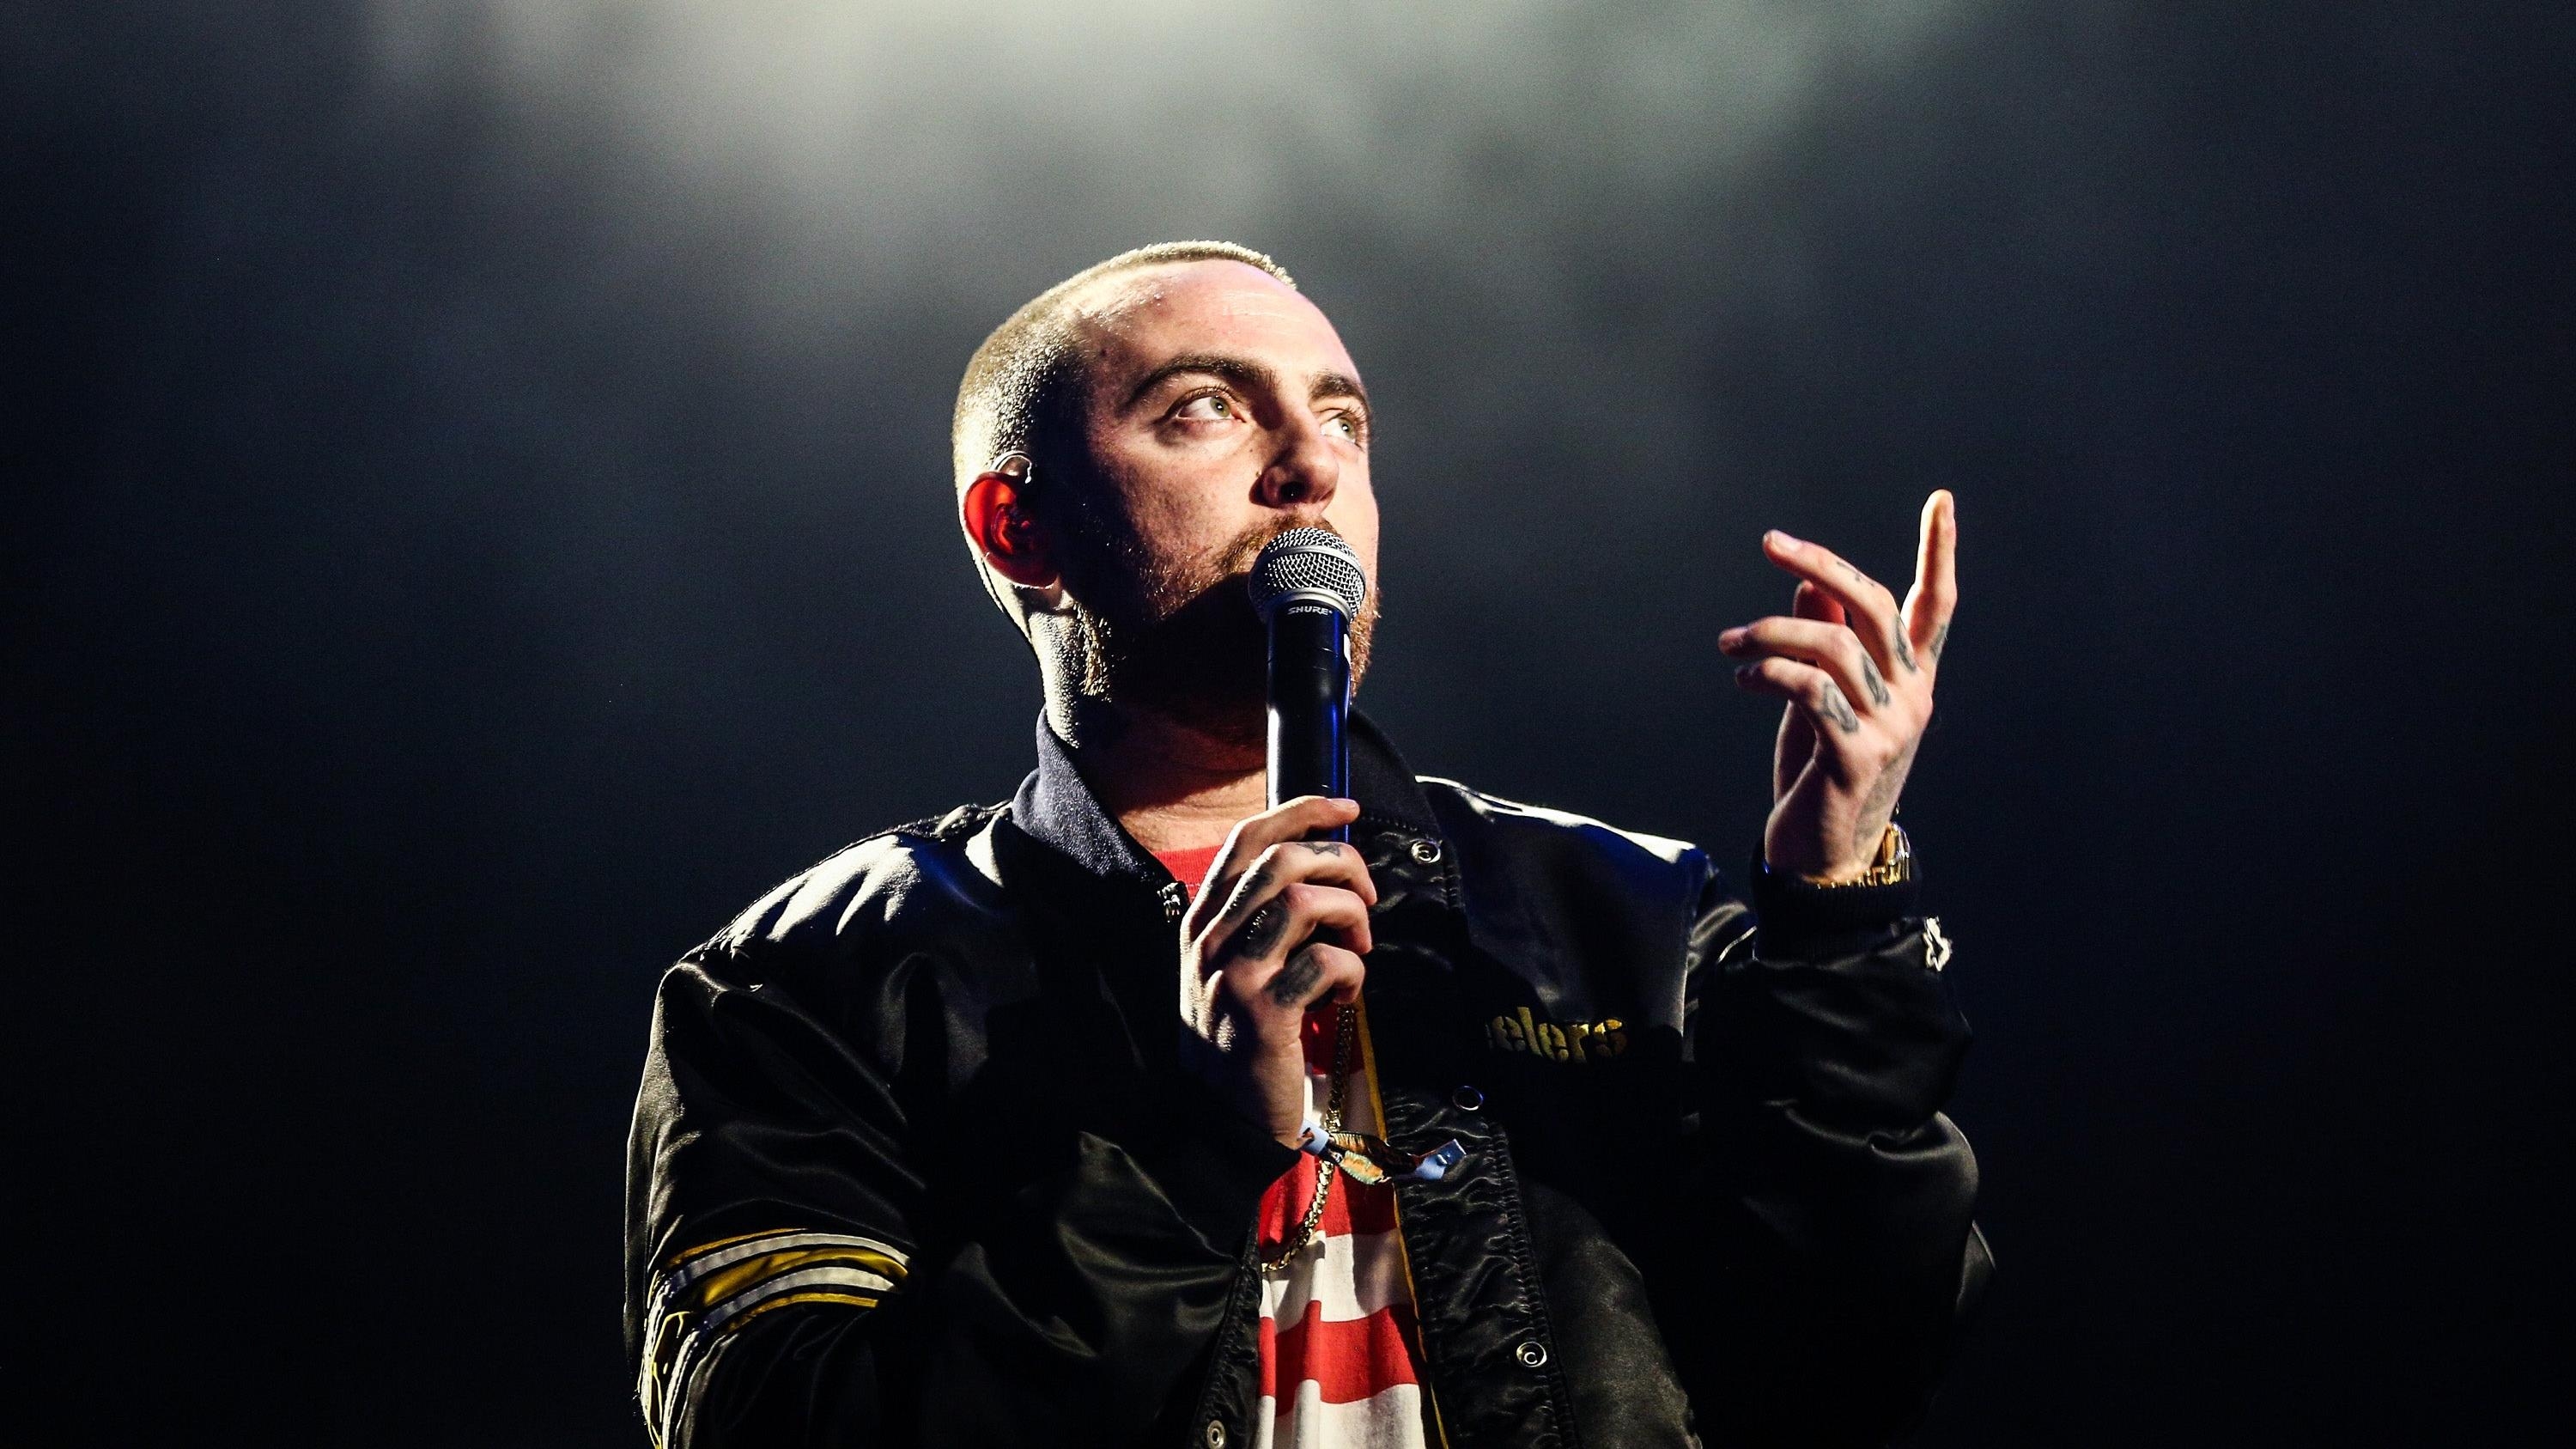 One man pleads guilty to drug charge in connection with Mac Miller’s death